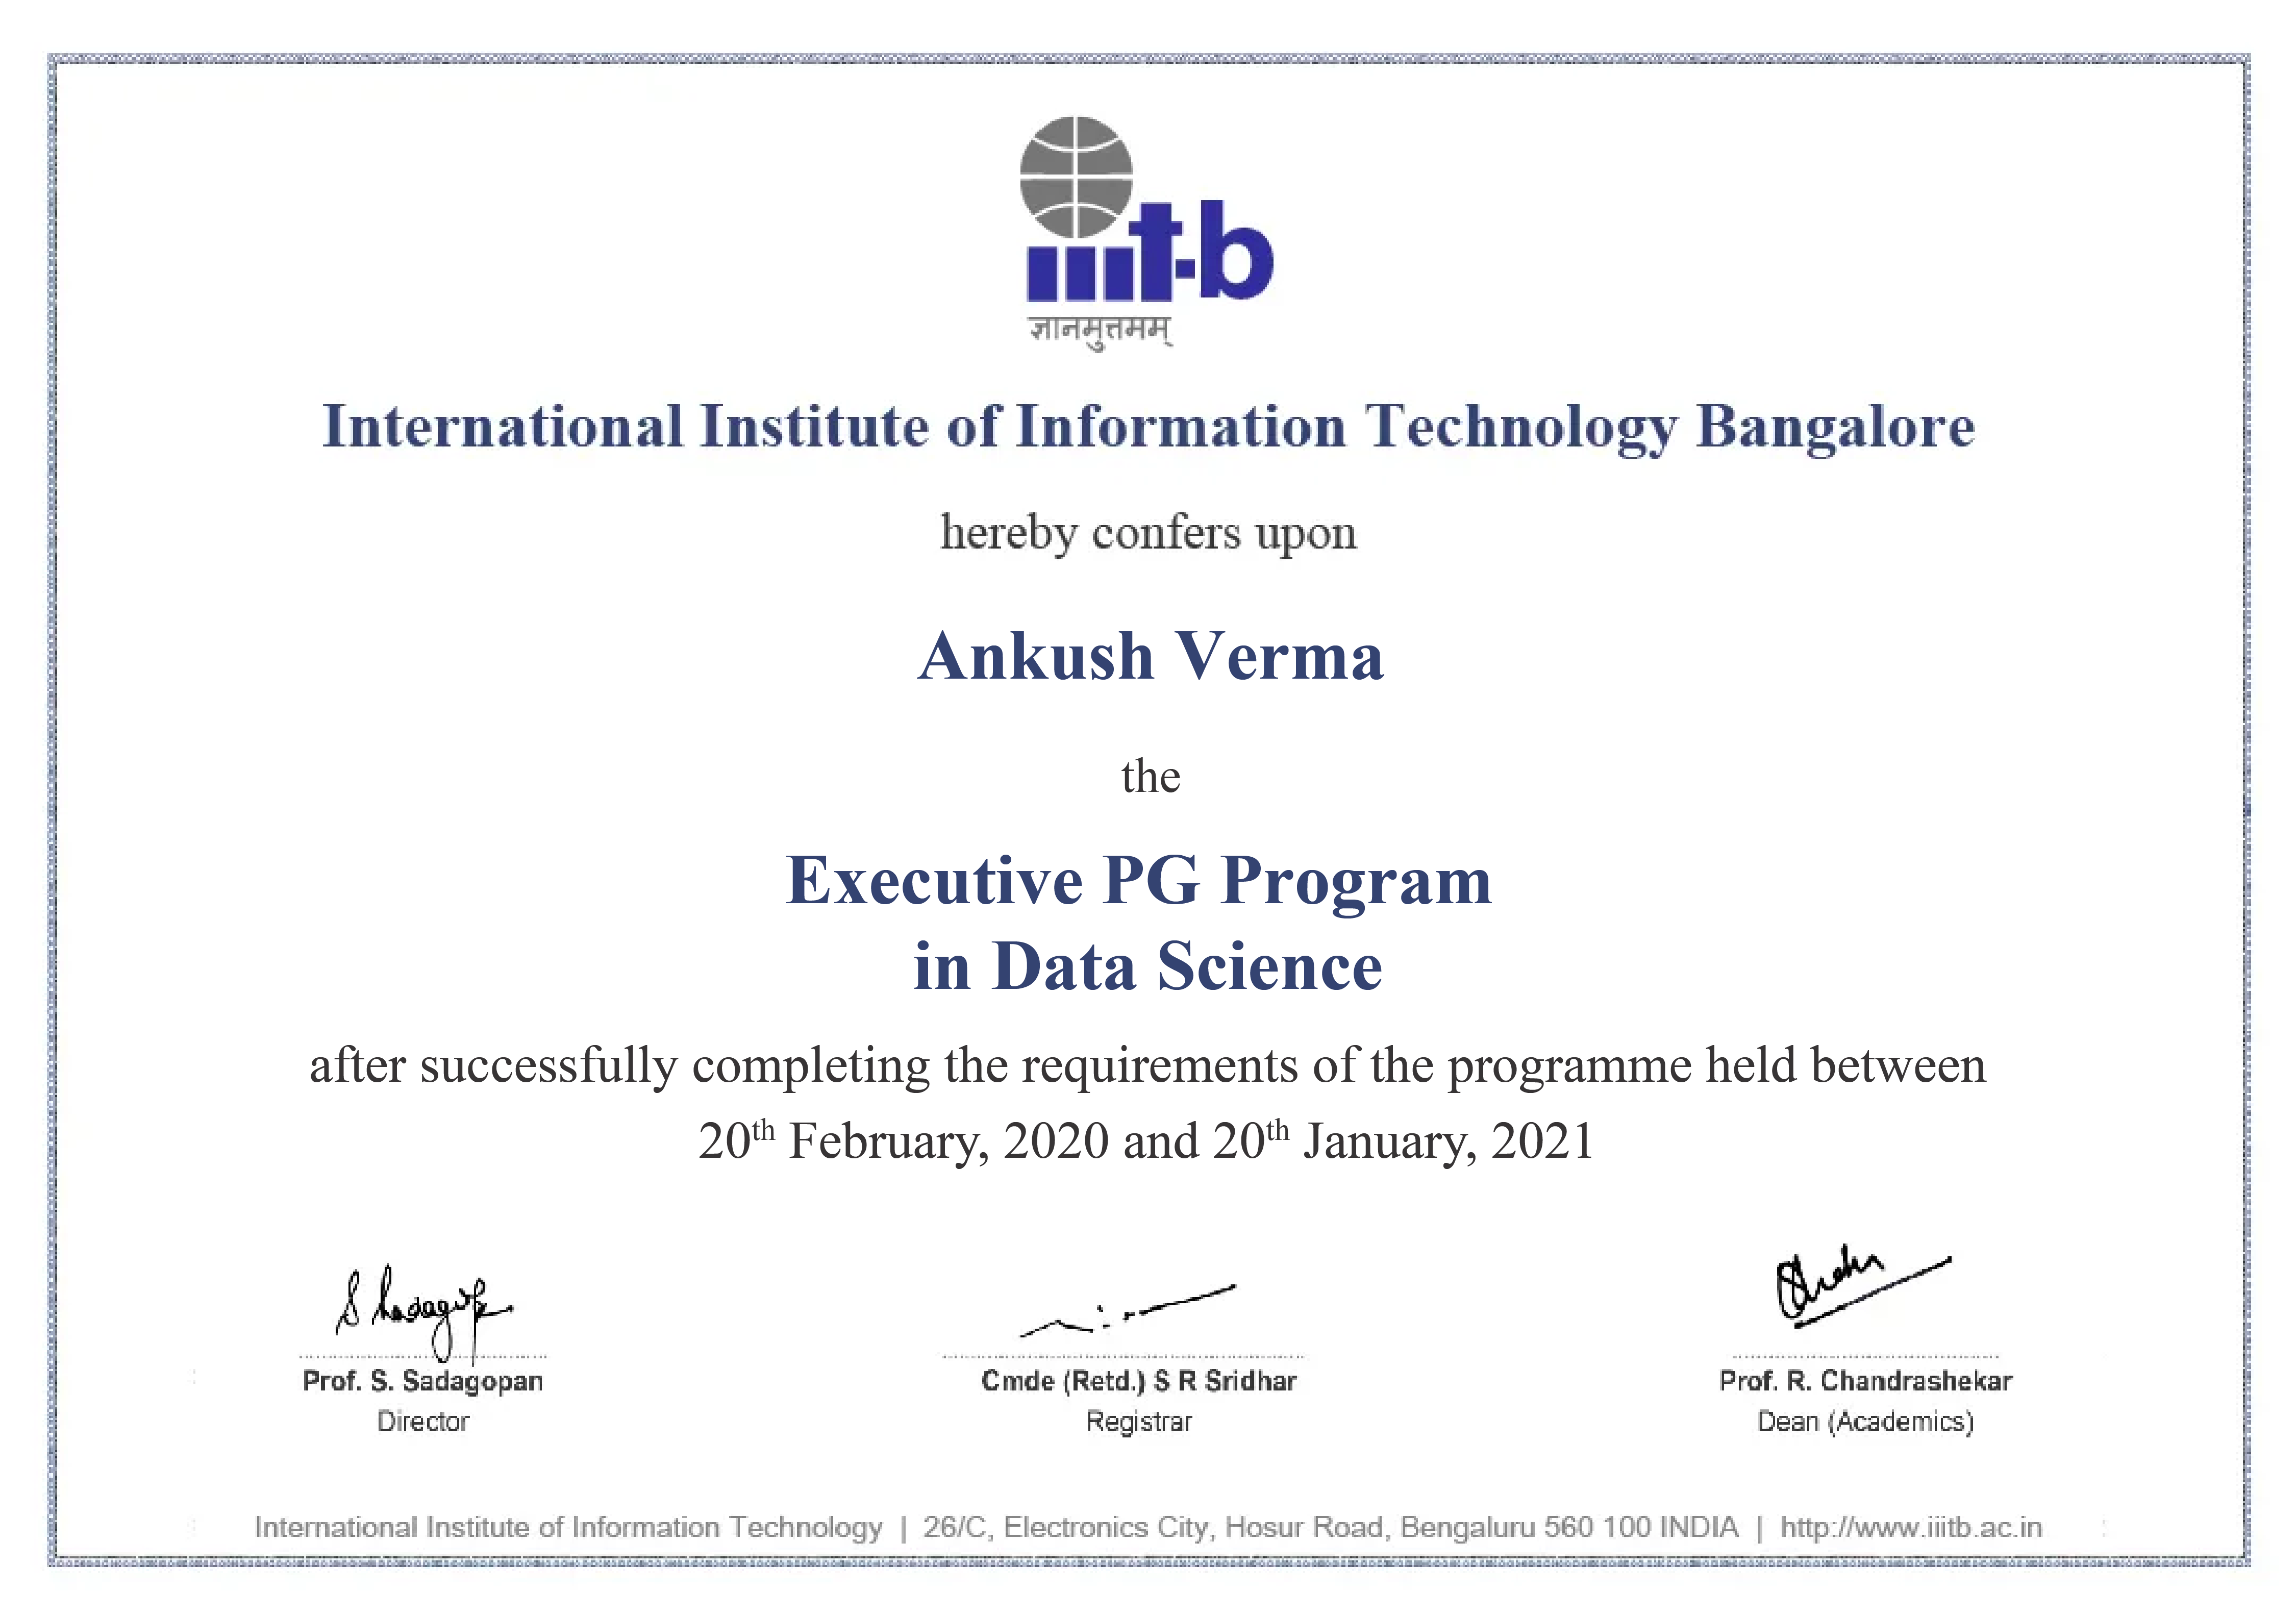 Executive PG Program in Data Science from IIIT Bangalore